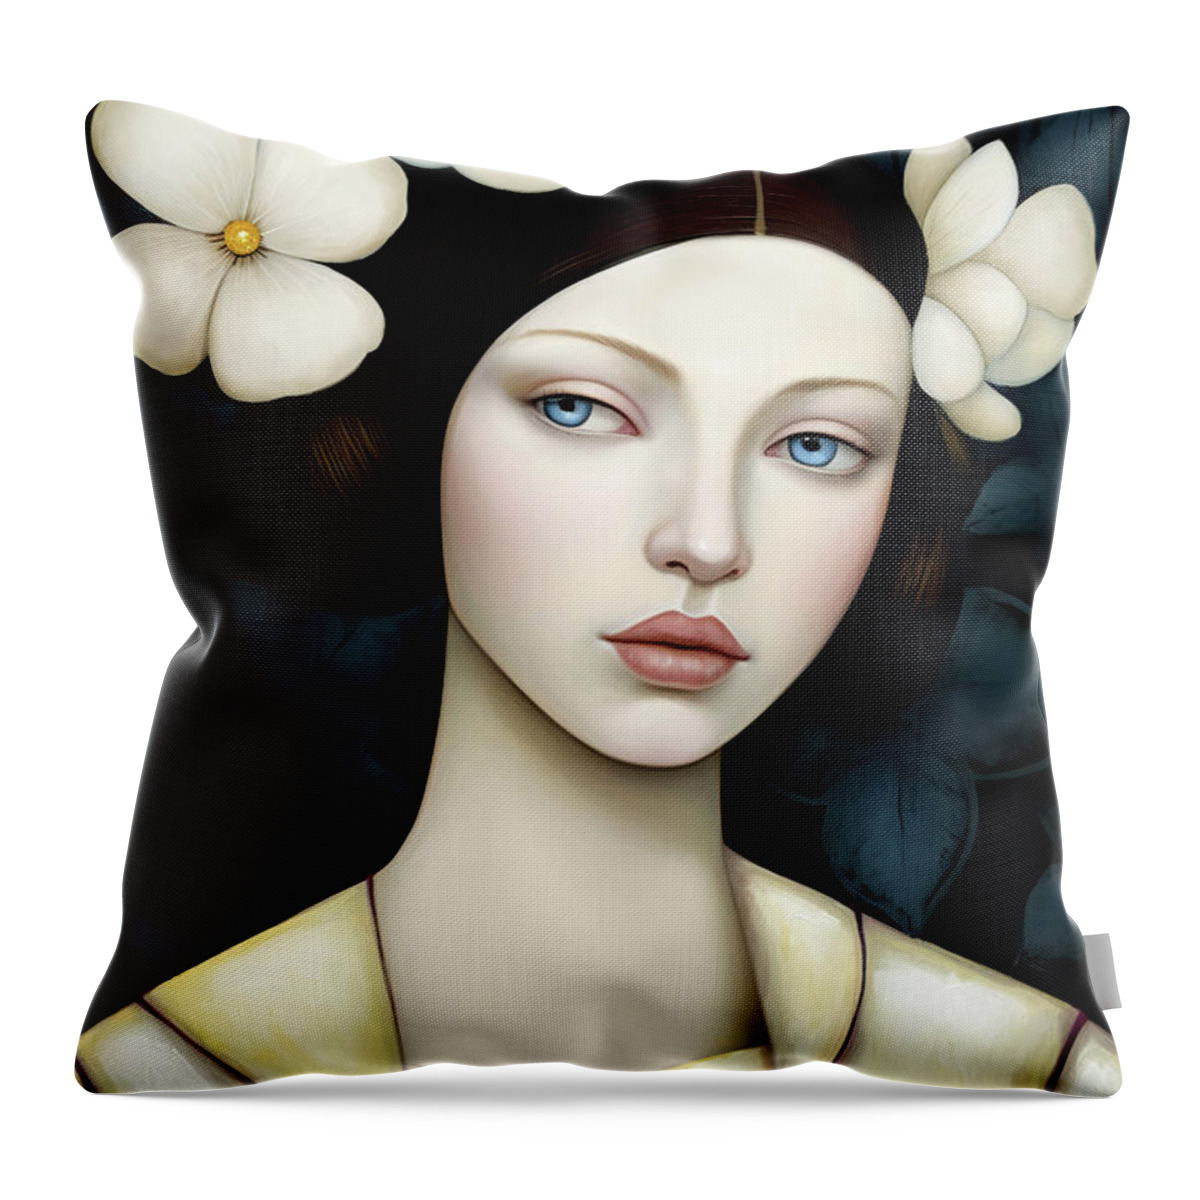 Portrait Throw Pillow featuring the painting Evi by Jacky Gerritsen